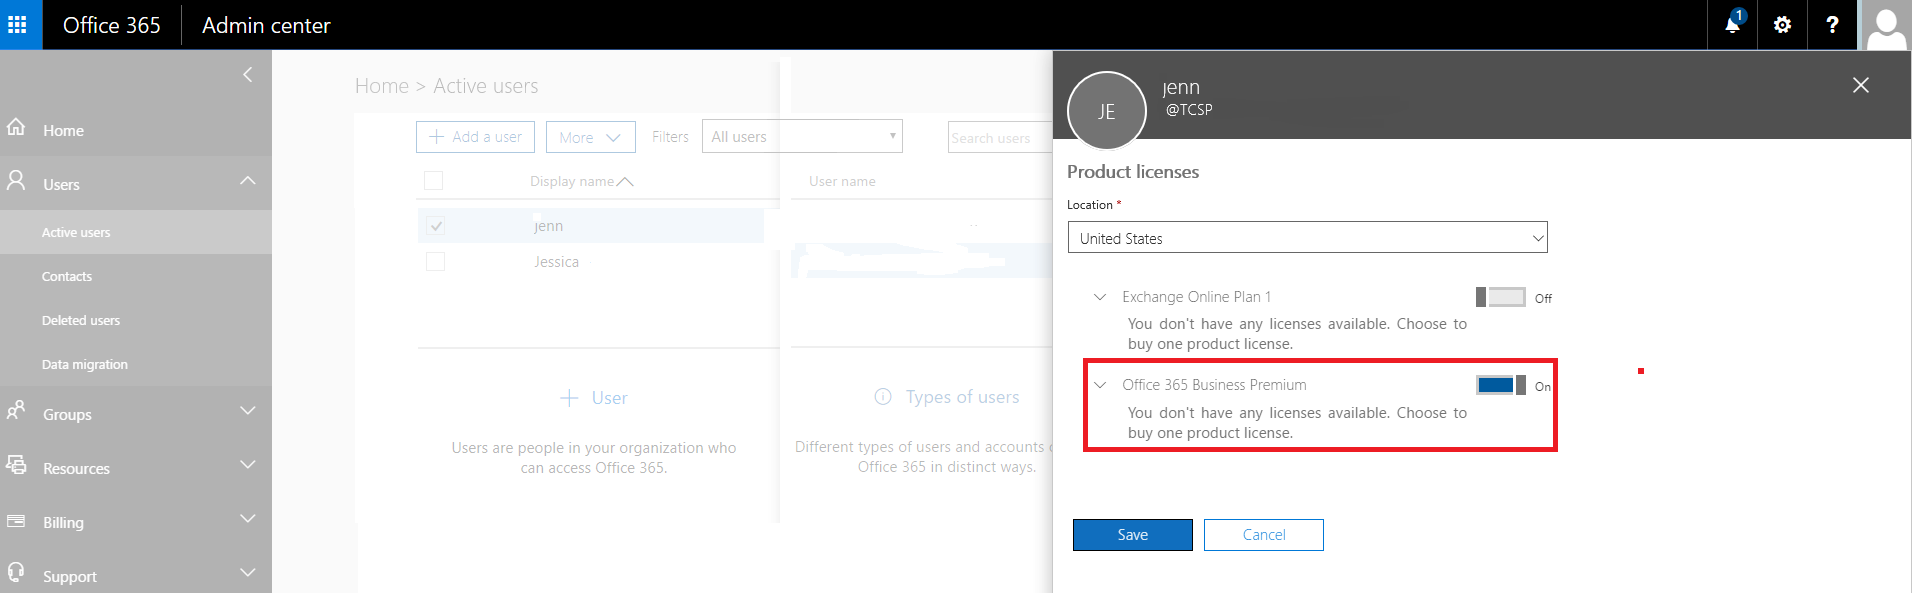 Remove A License In Office 365